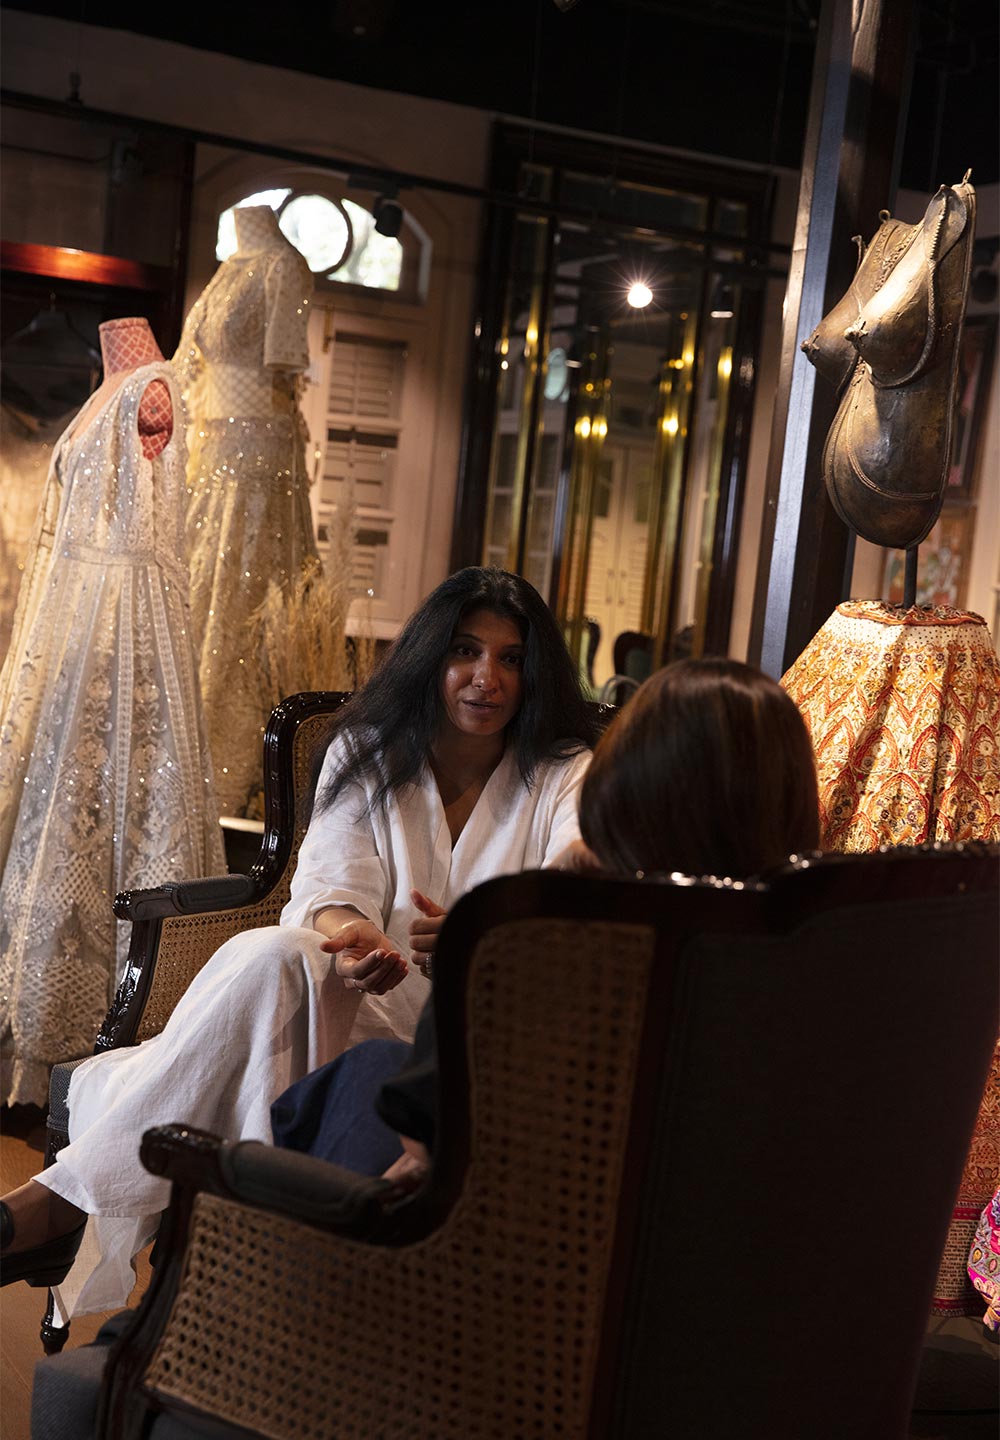 Monica Shah, co-Founder of Jade and the Chanakya school of craft, in conversation with Rachana Singh, unit leader for Fashion Business and Postgraduate Programme at Istituto Marangoni Mumbai